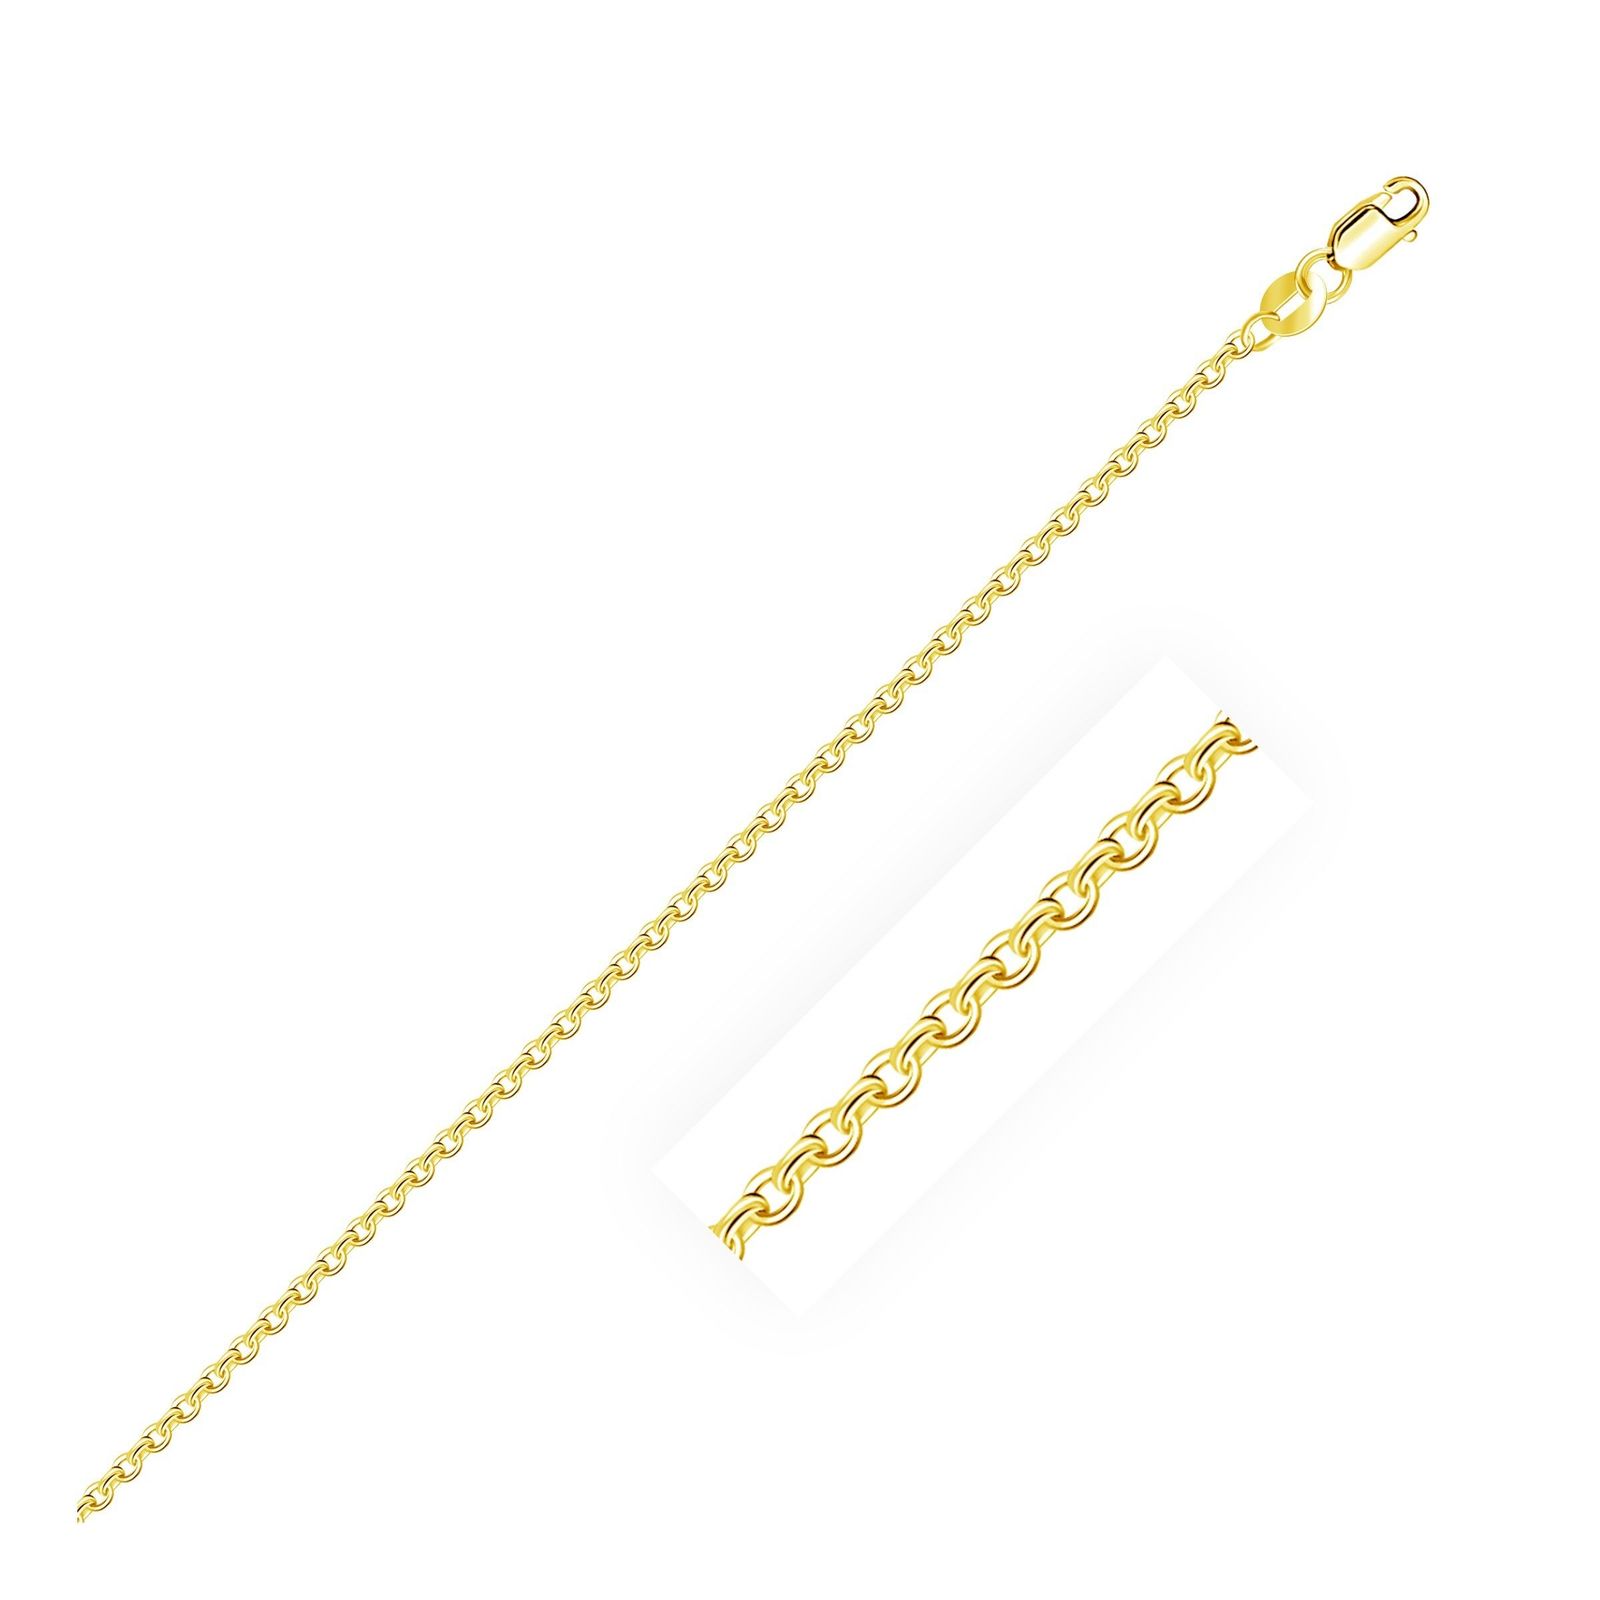 14k Yellow Gold Diamond Cut Cable Link Chain 1.5mm, size 22''